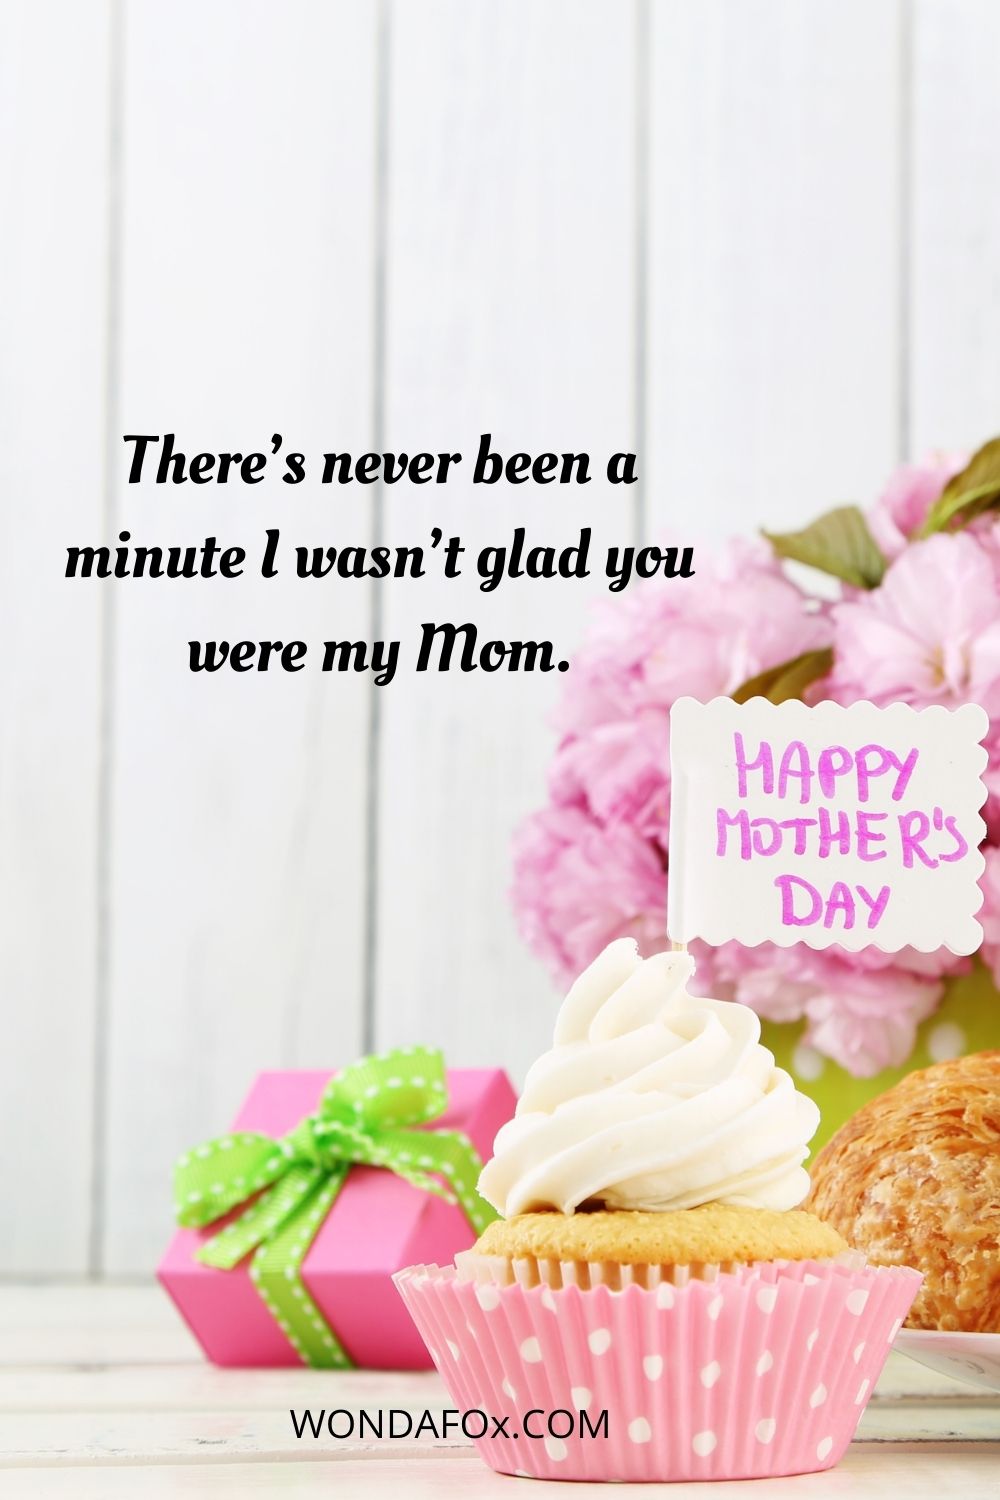 There’s never been a minute I wasn’t glad you were my Mom. Mothers day wishes